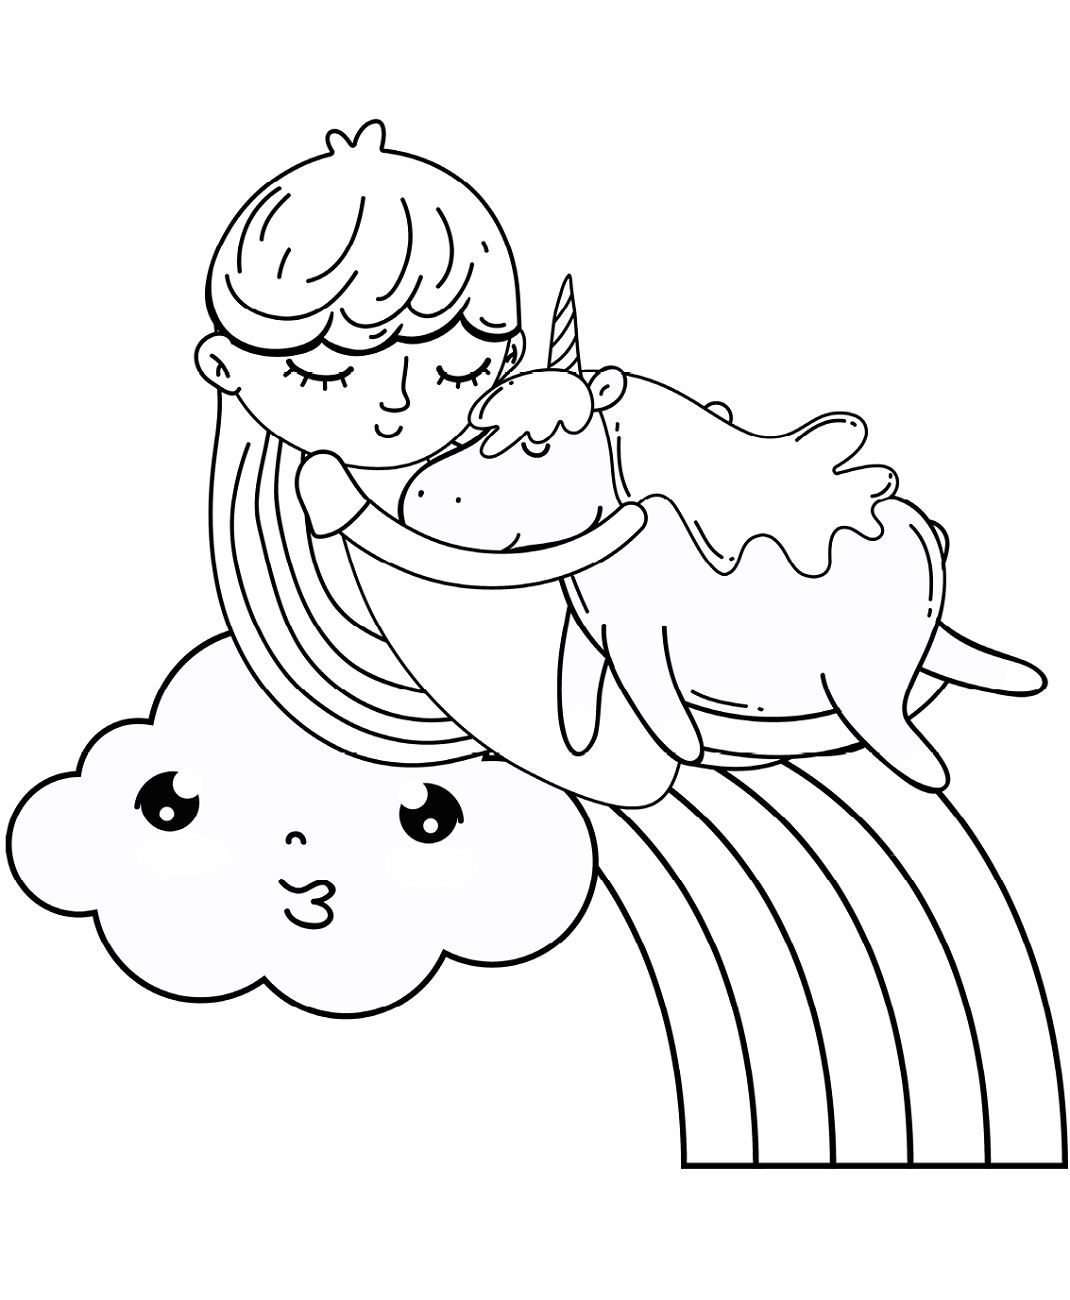 Girl Sleeping With Unicorn Coloring Page - Free Printable Coloring